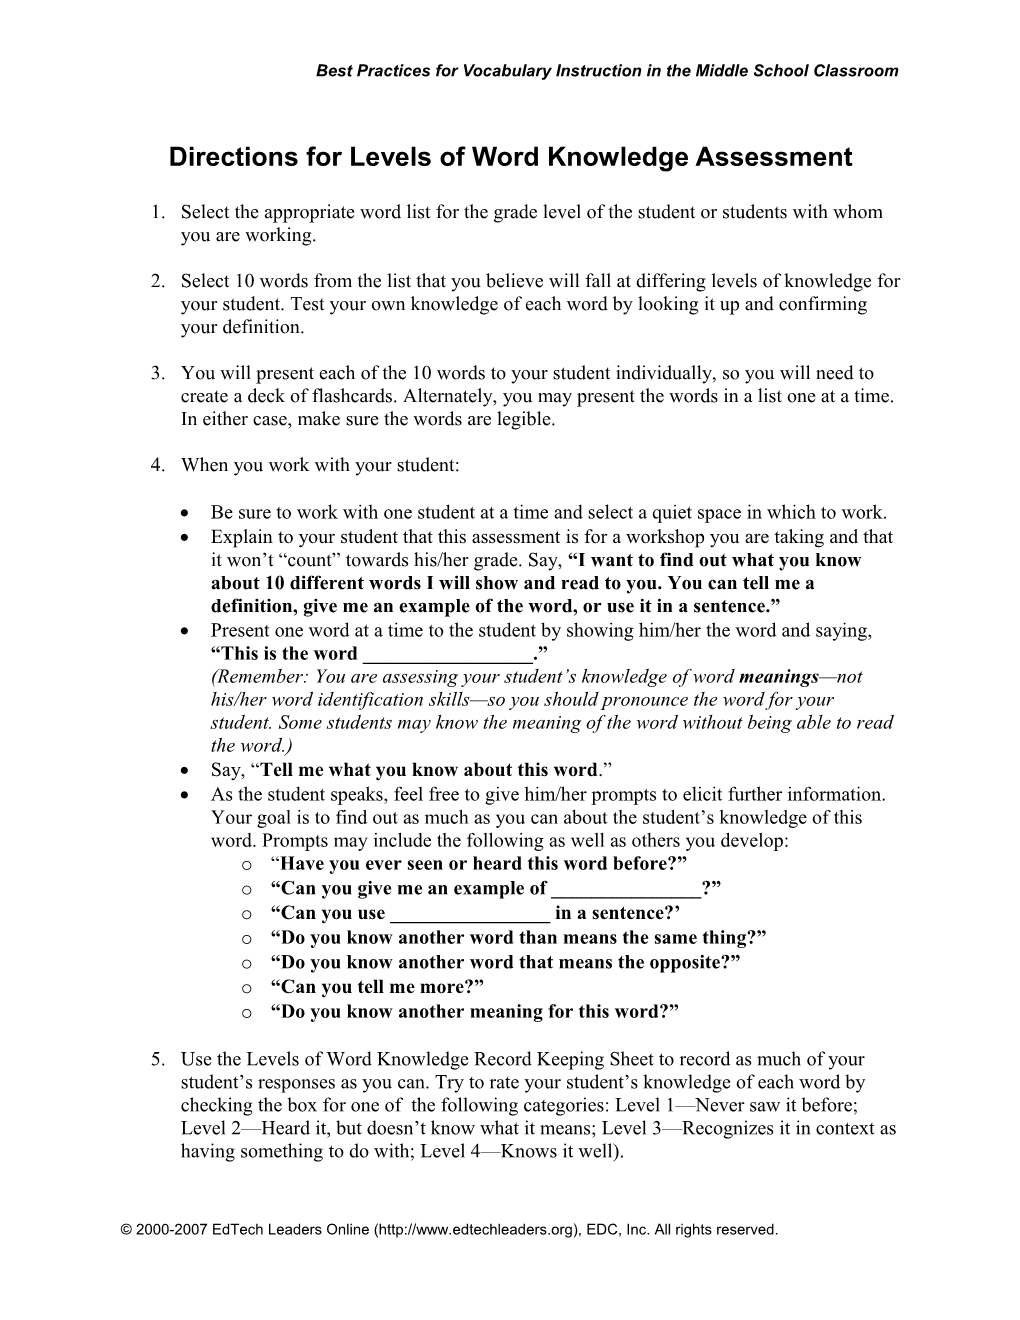 Directions for Levels of Word Knowledge Assessment